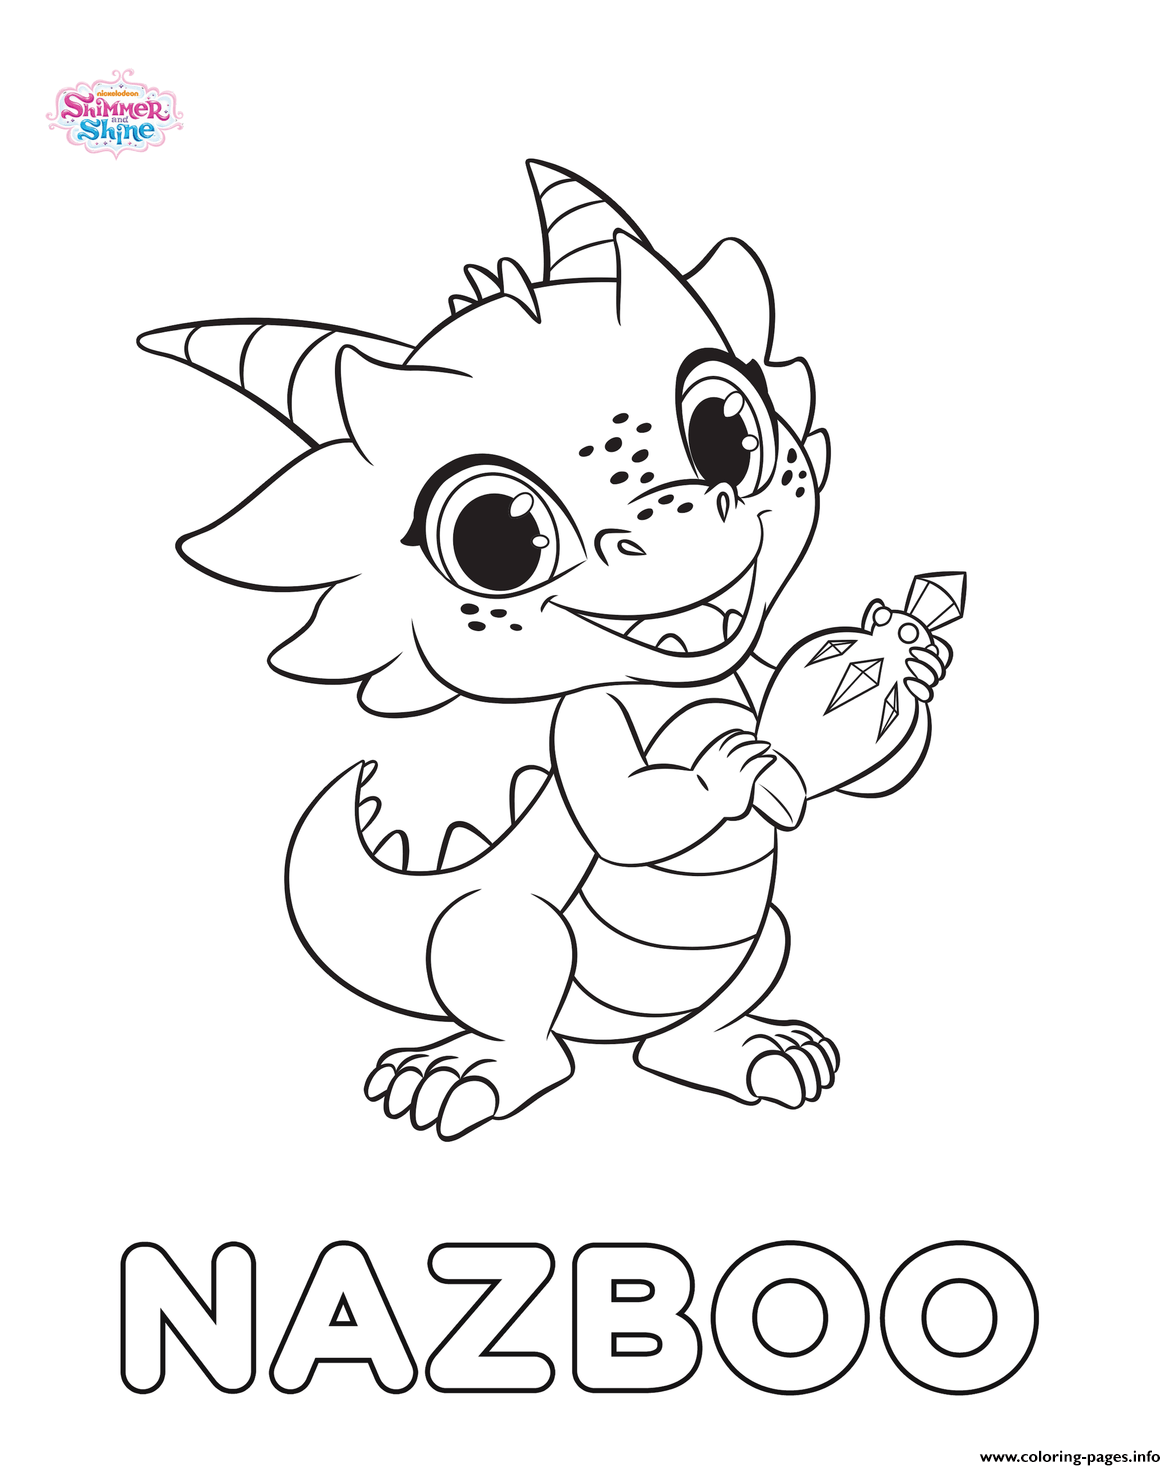 Shimmer And Shine Nazboo coloring pages